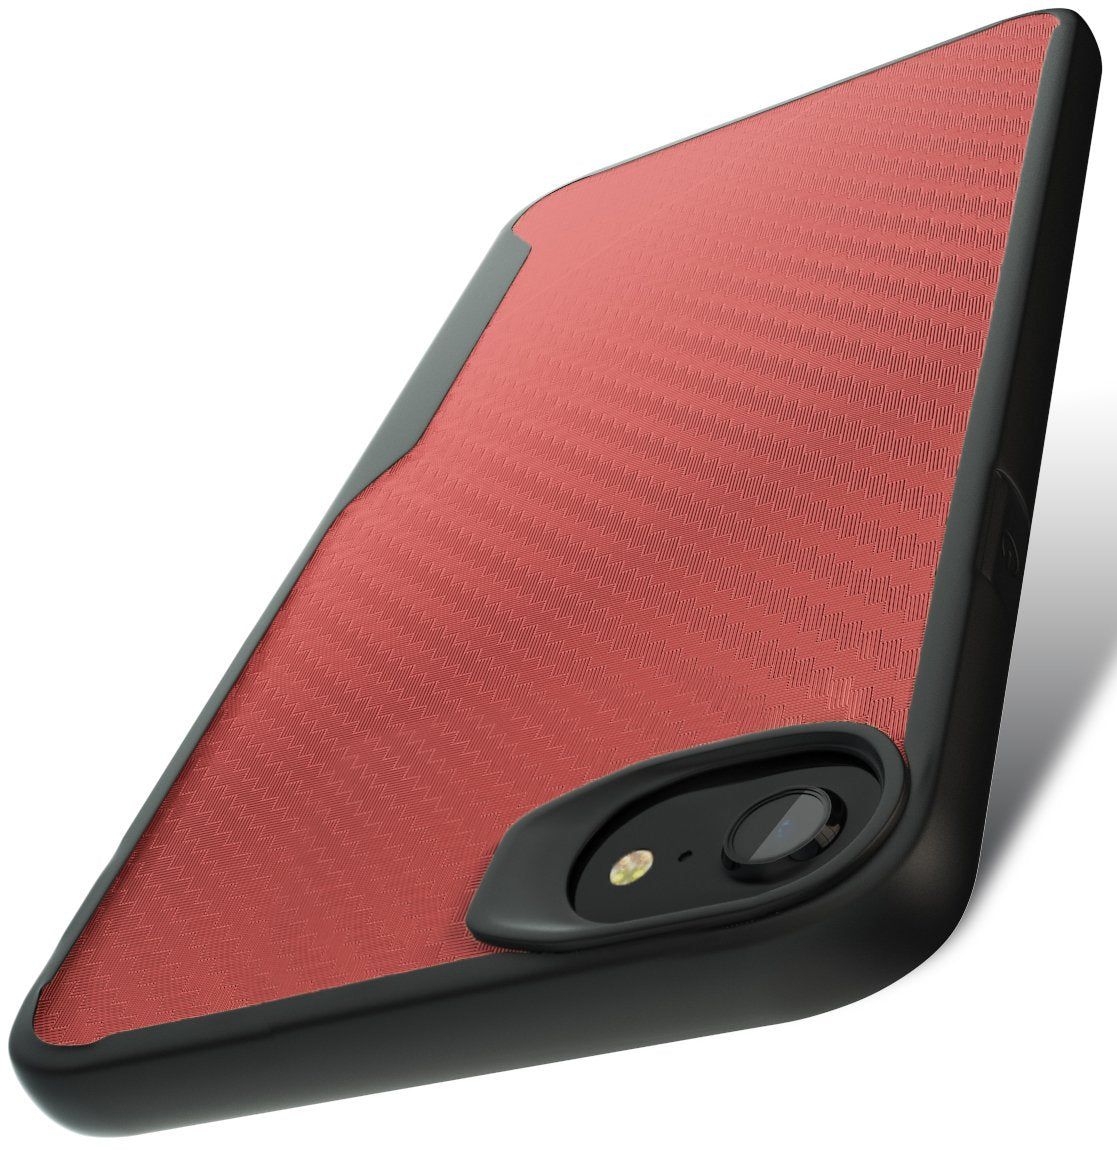 iPhone 7 / iPhone 8 Kitoo Carbon Fiber Pattern Case Red